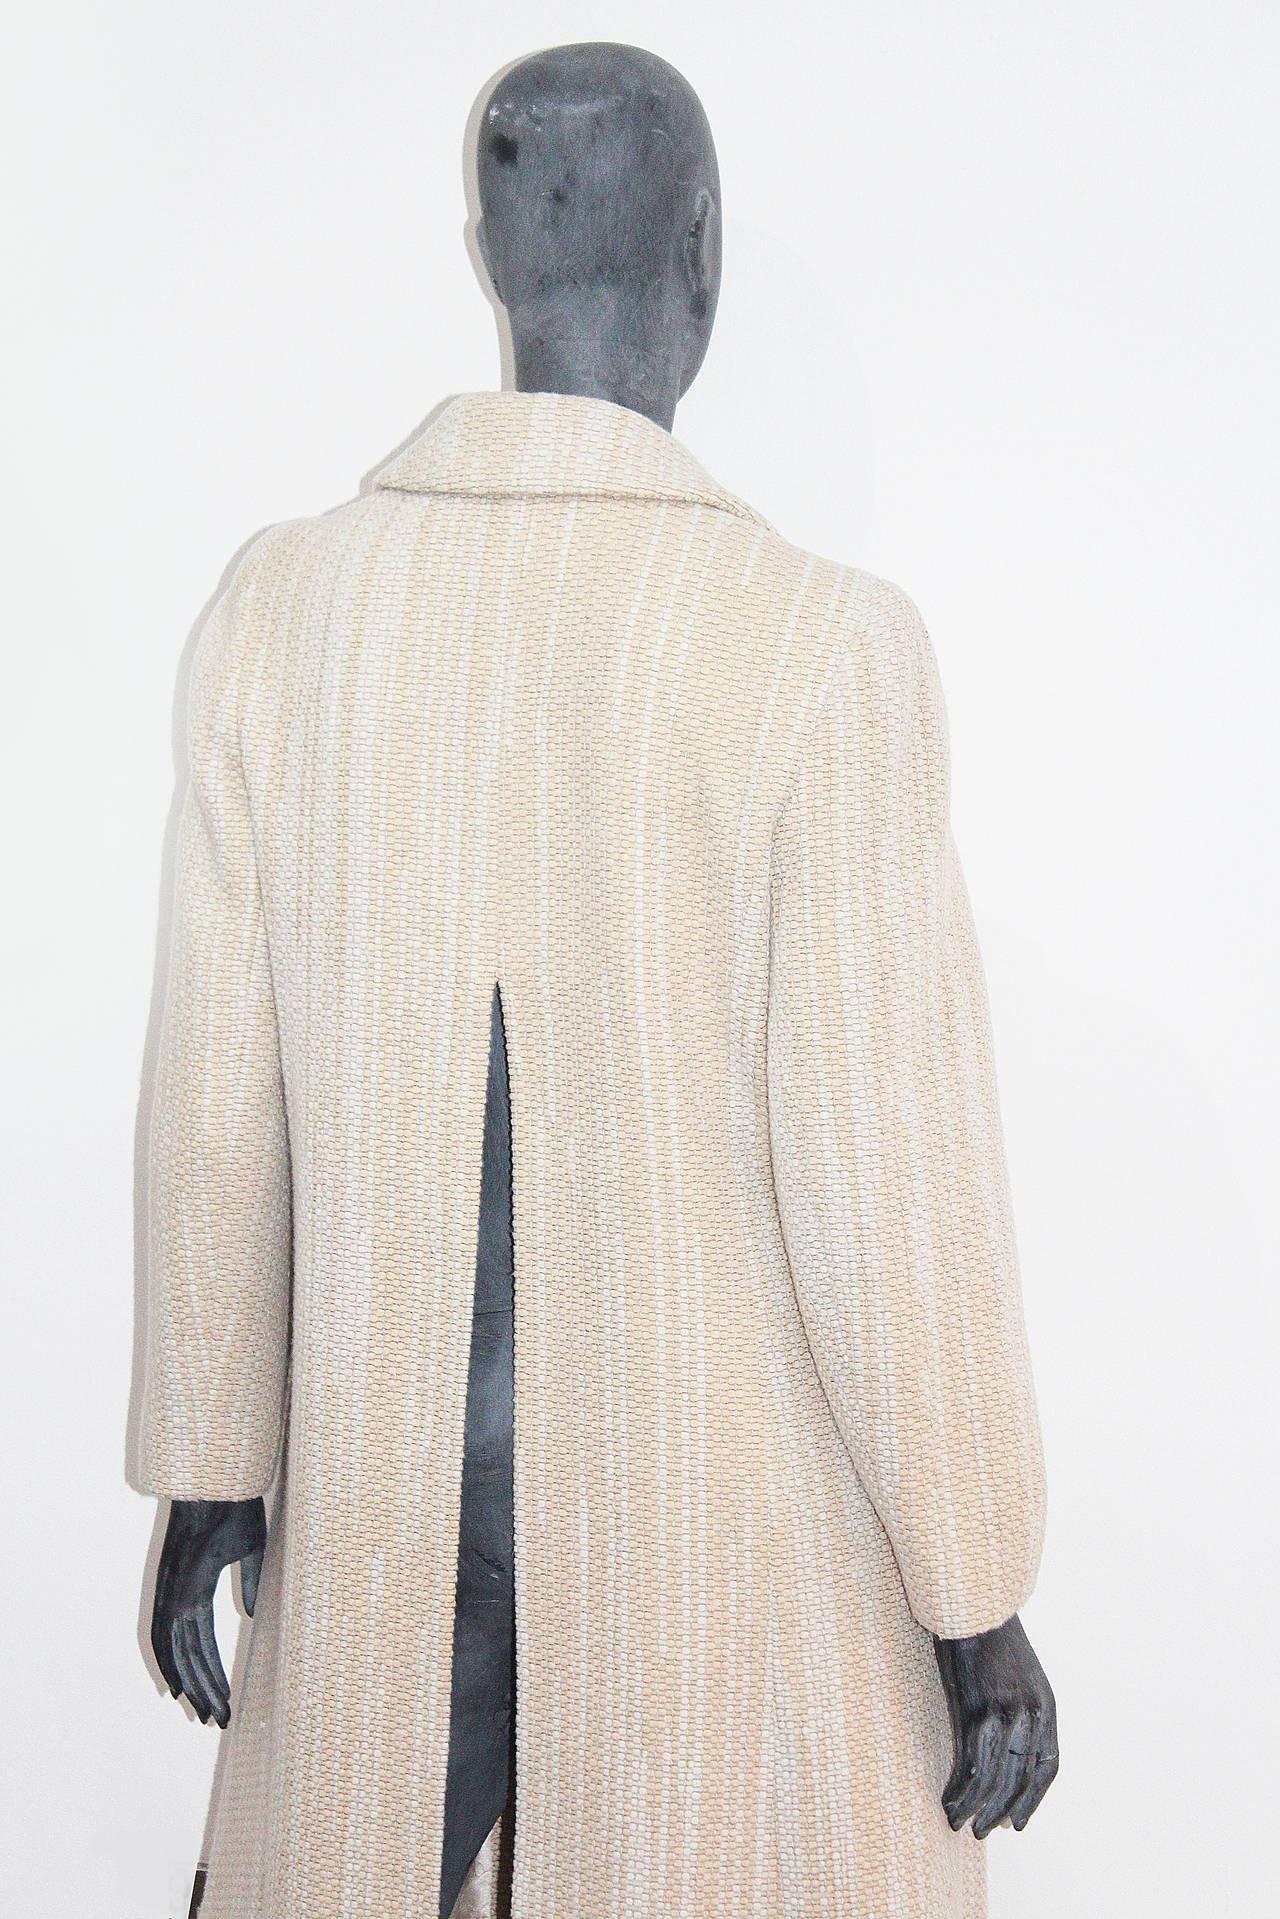 Beige Chanel full length tweed coat with back slit, Fall 2001